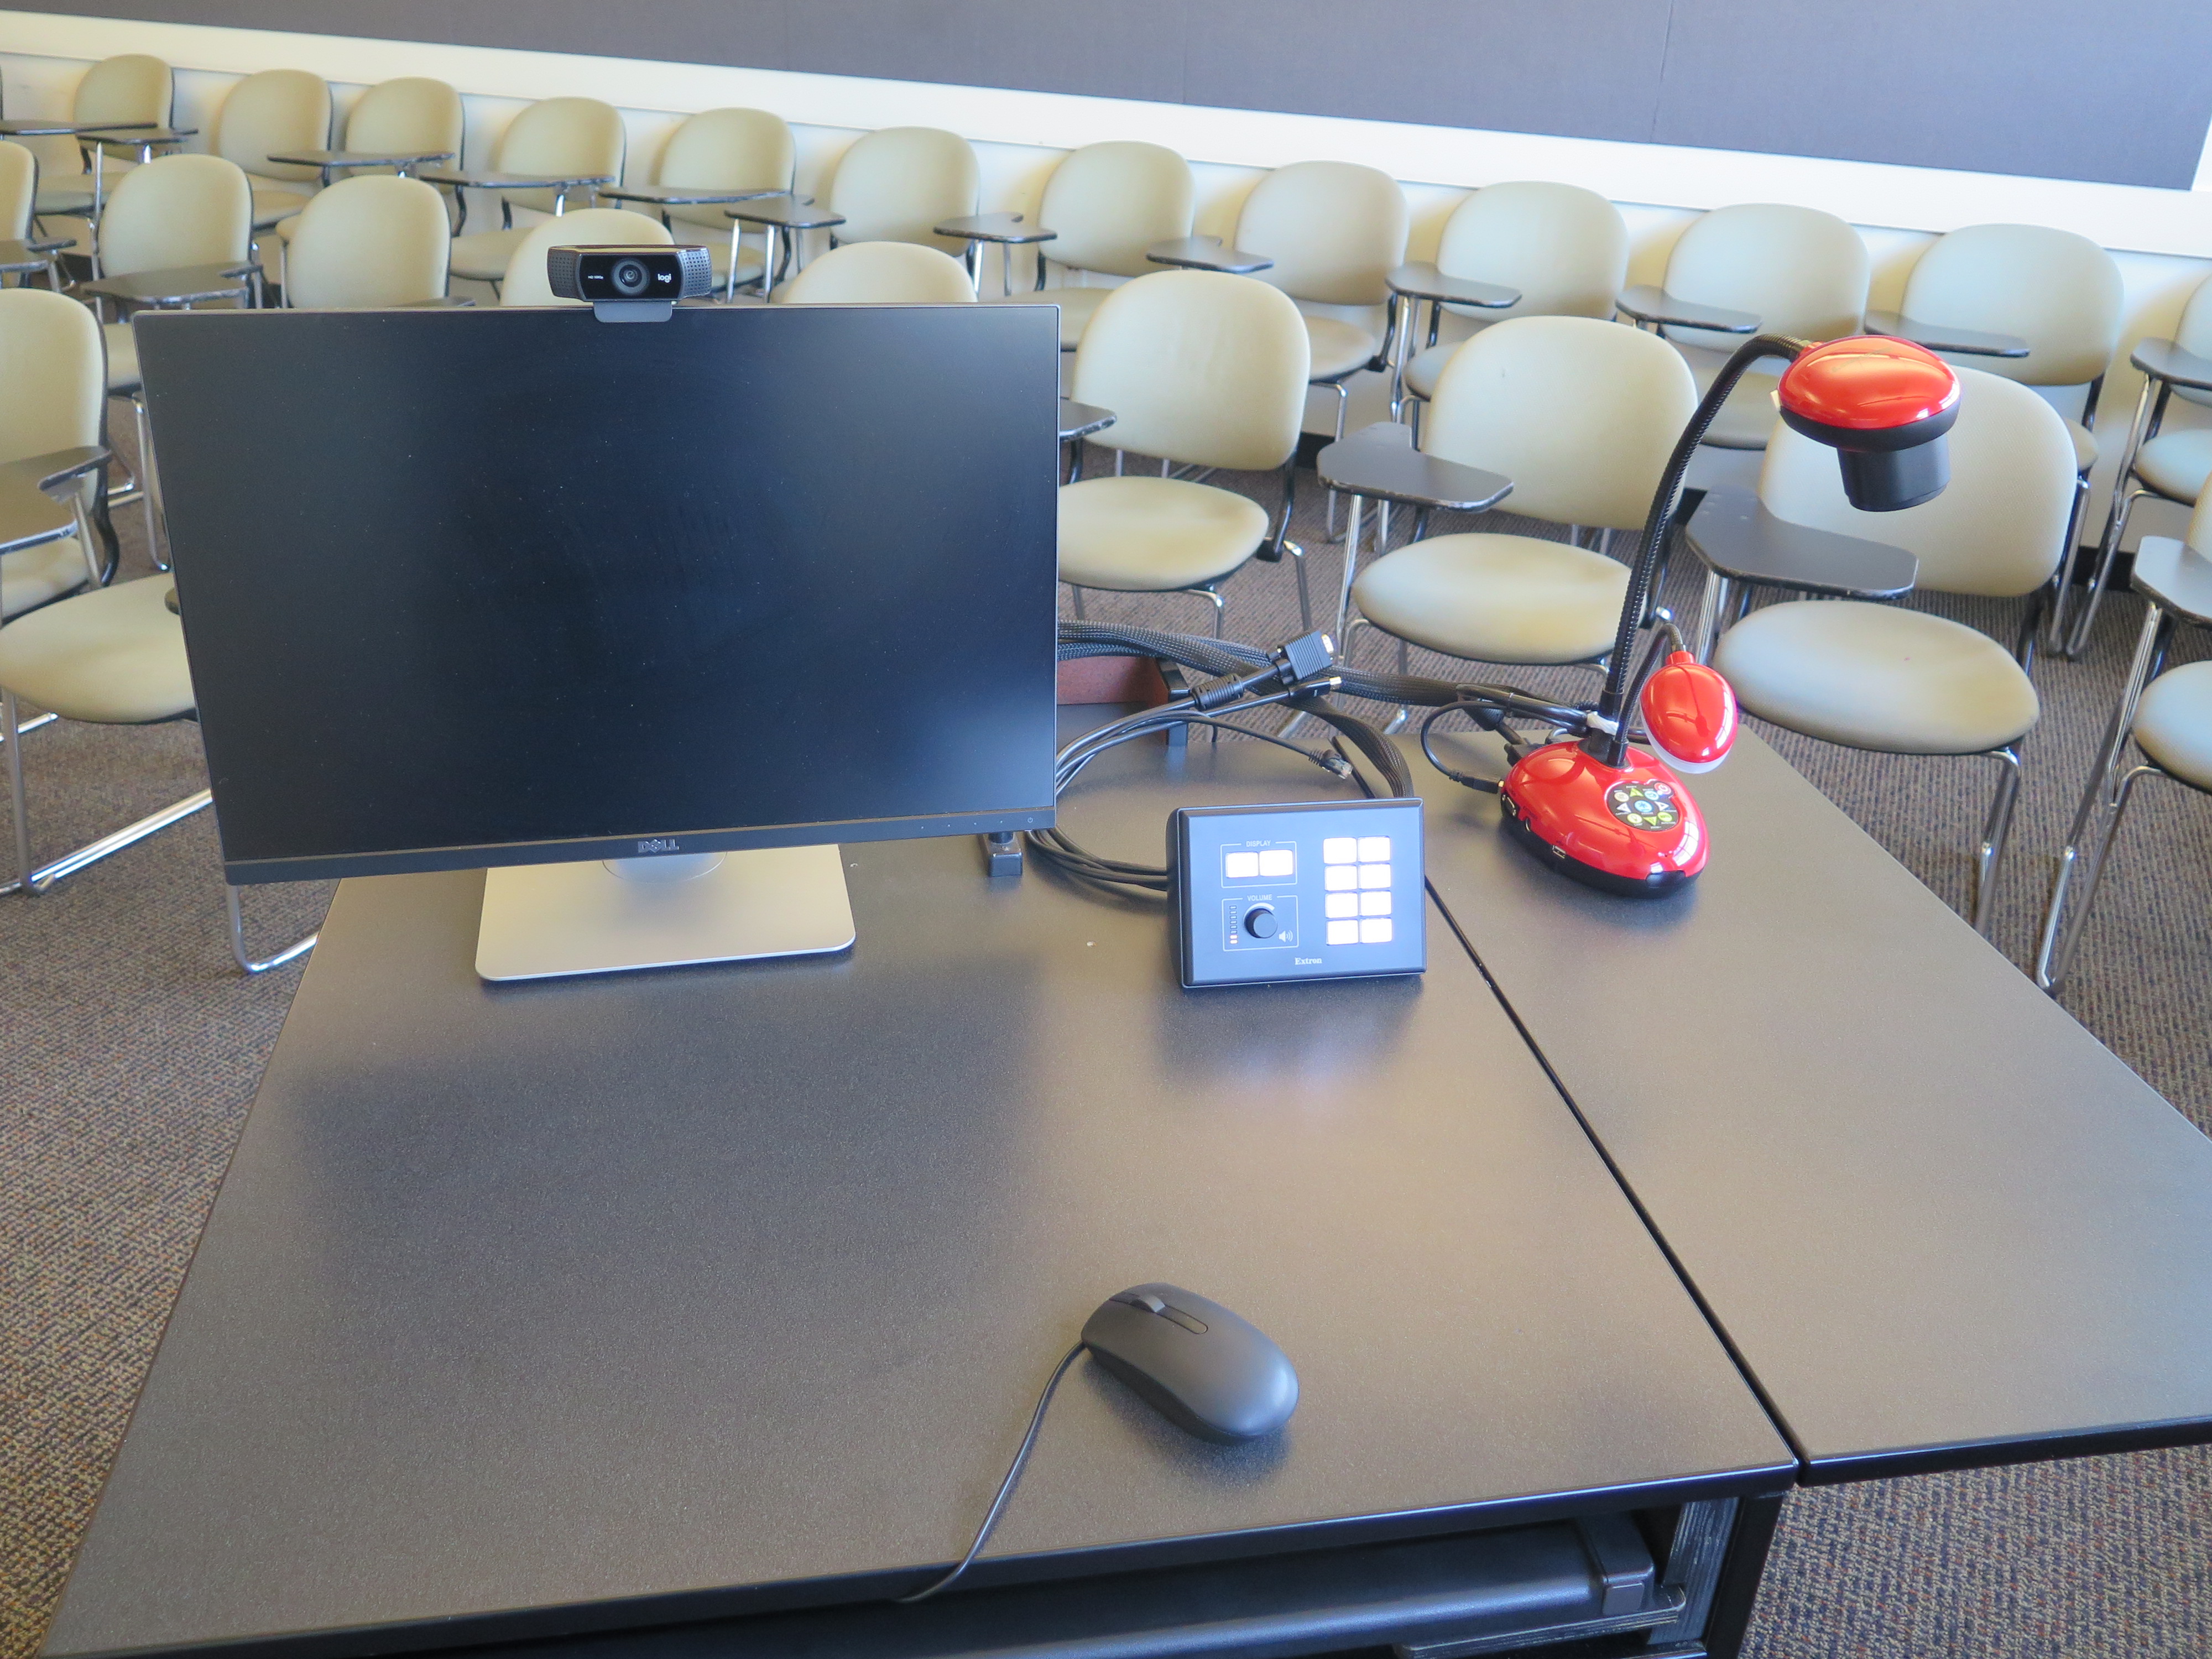 On top of podium is Logitech 920 webcam, Dell computer monitor, AV push button controller, and Lumens Ladybug document camera